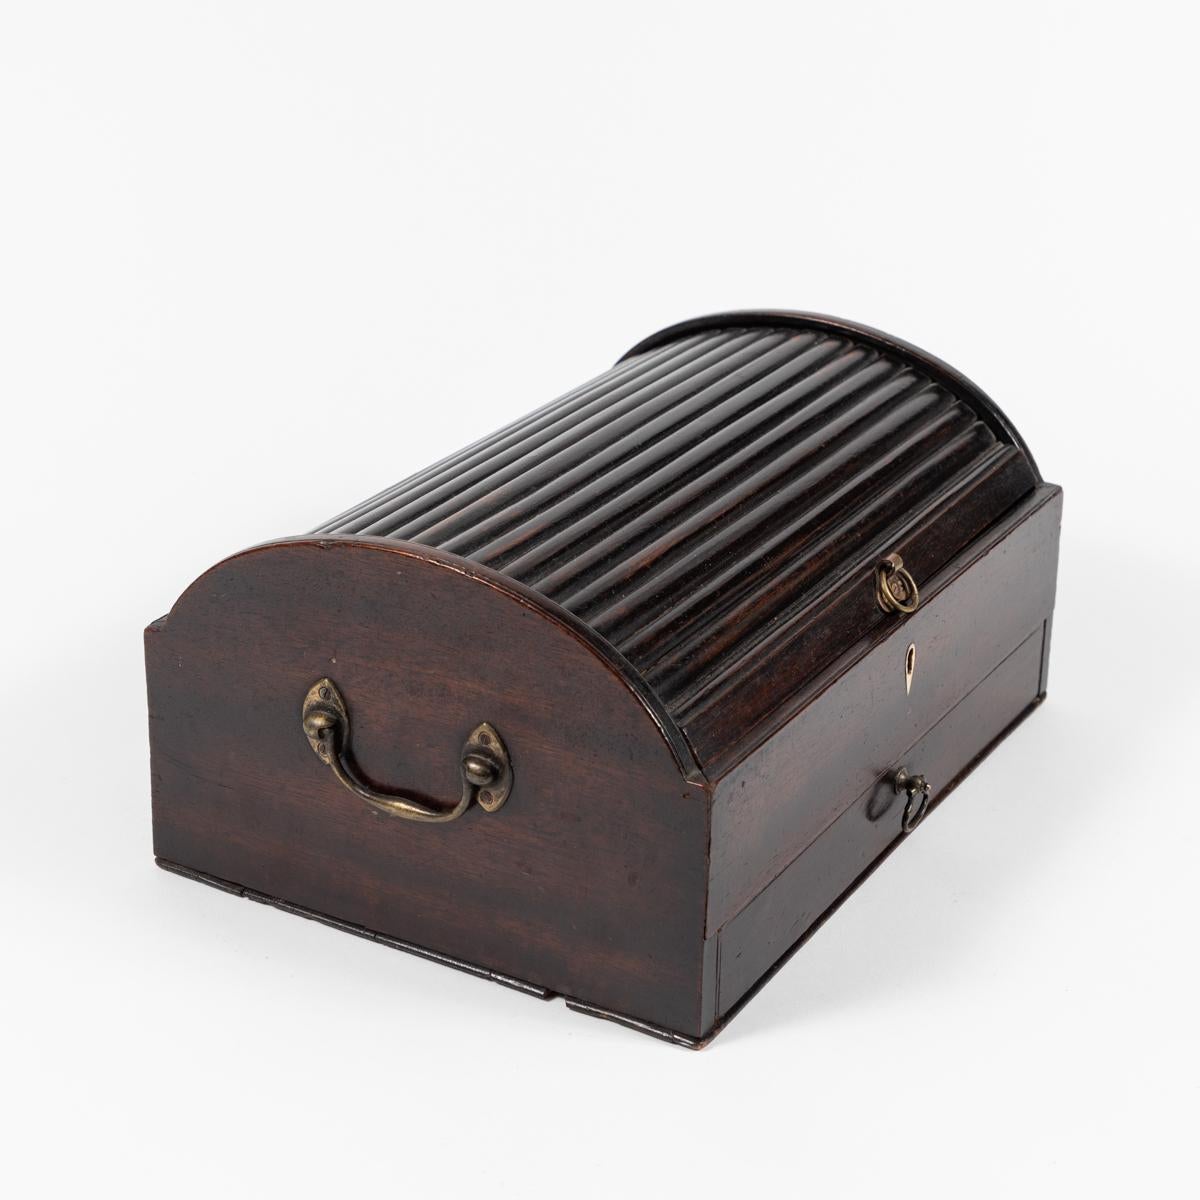 This Tambour top writing box dates from late 19th century England. It features a unique Tambour top a deep brown finish, and would be great for storing jewelry or other small items. 
  